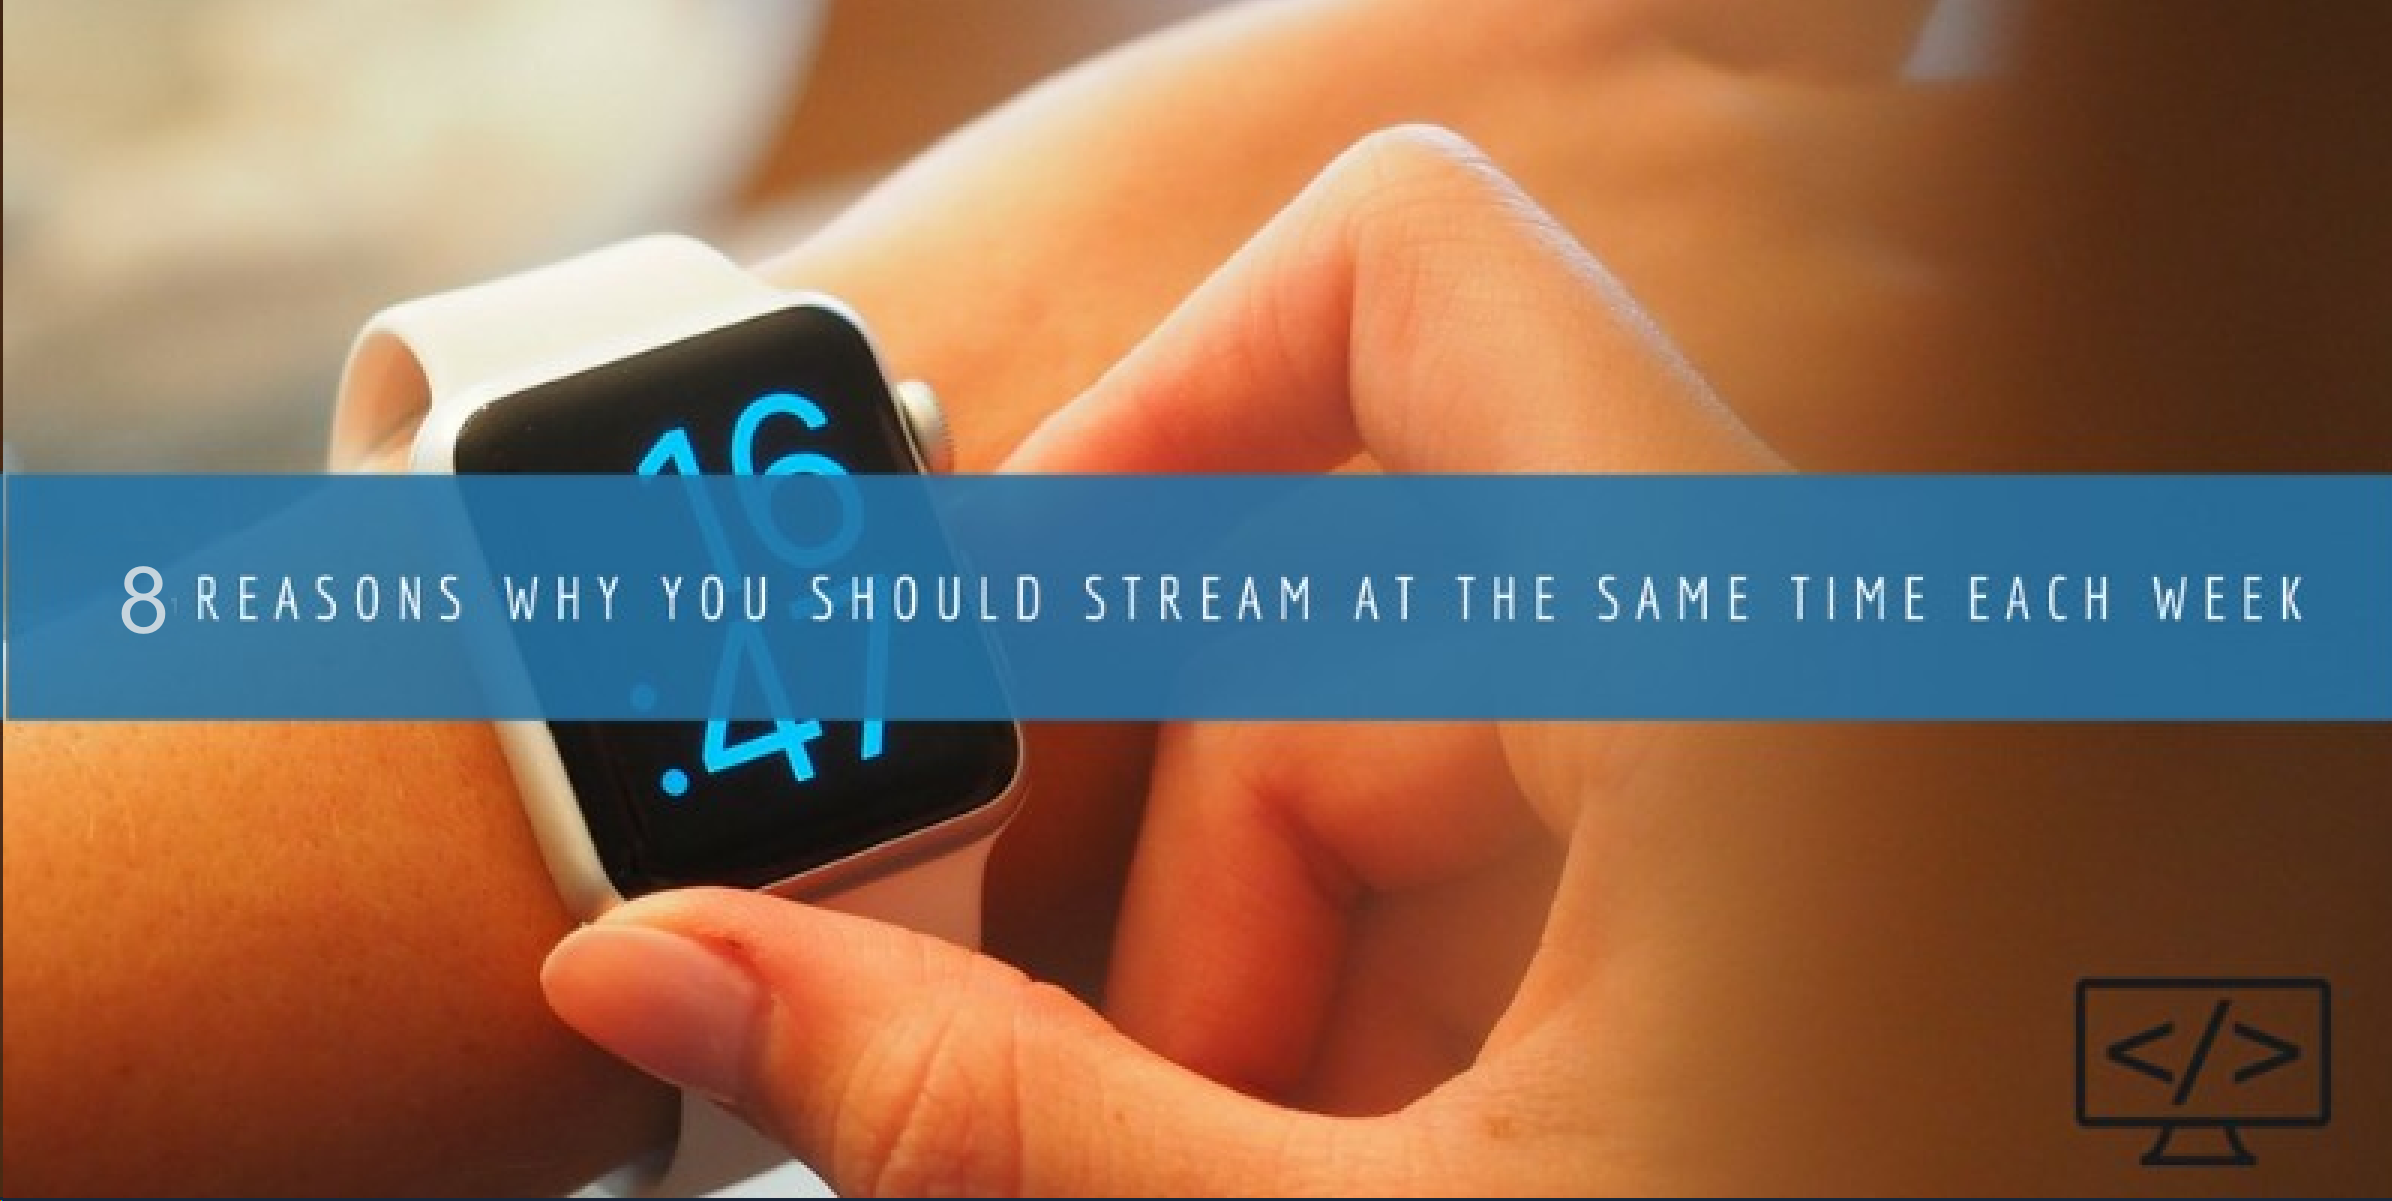 8 Reasons Why You Should Stream at The Same Time Each Week